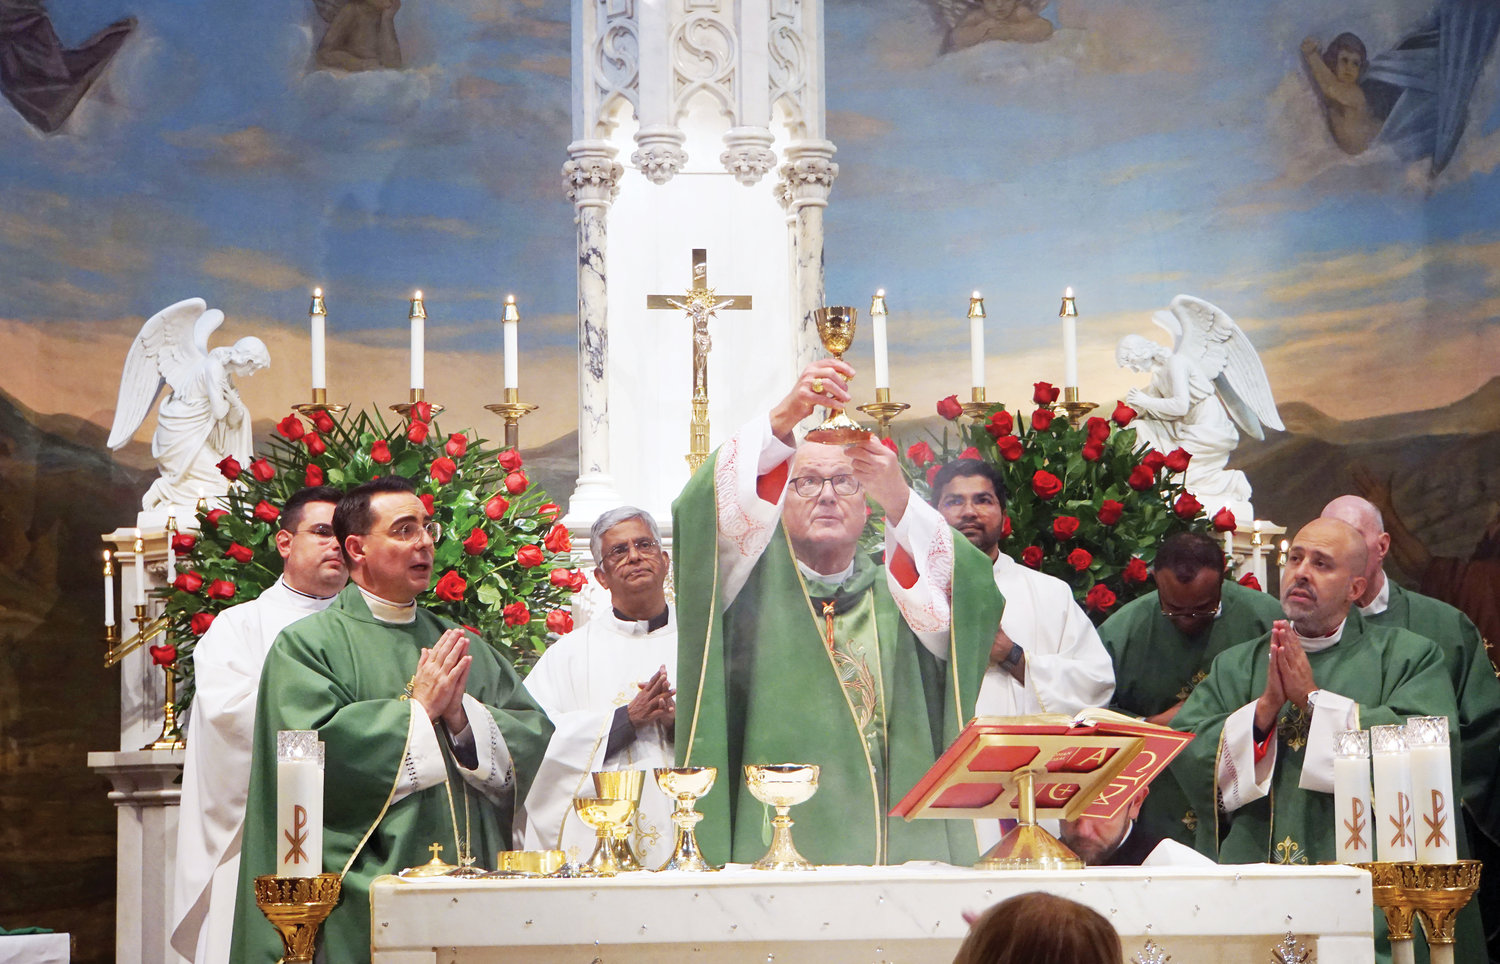 Cardinal Dolan elevates the Eucharist during the consecration at the Oct. 1 Mass celebrating the 100th anniversary of Our Lady of Pompeii in Dobbs Ferry.